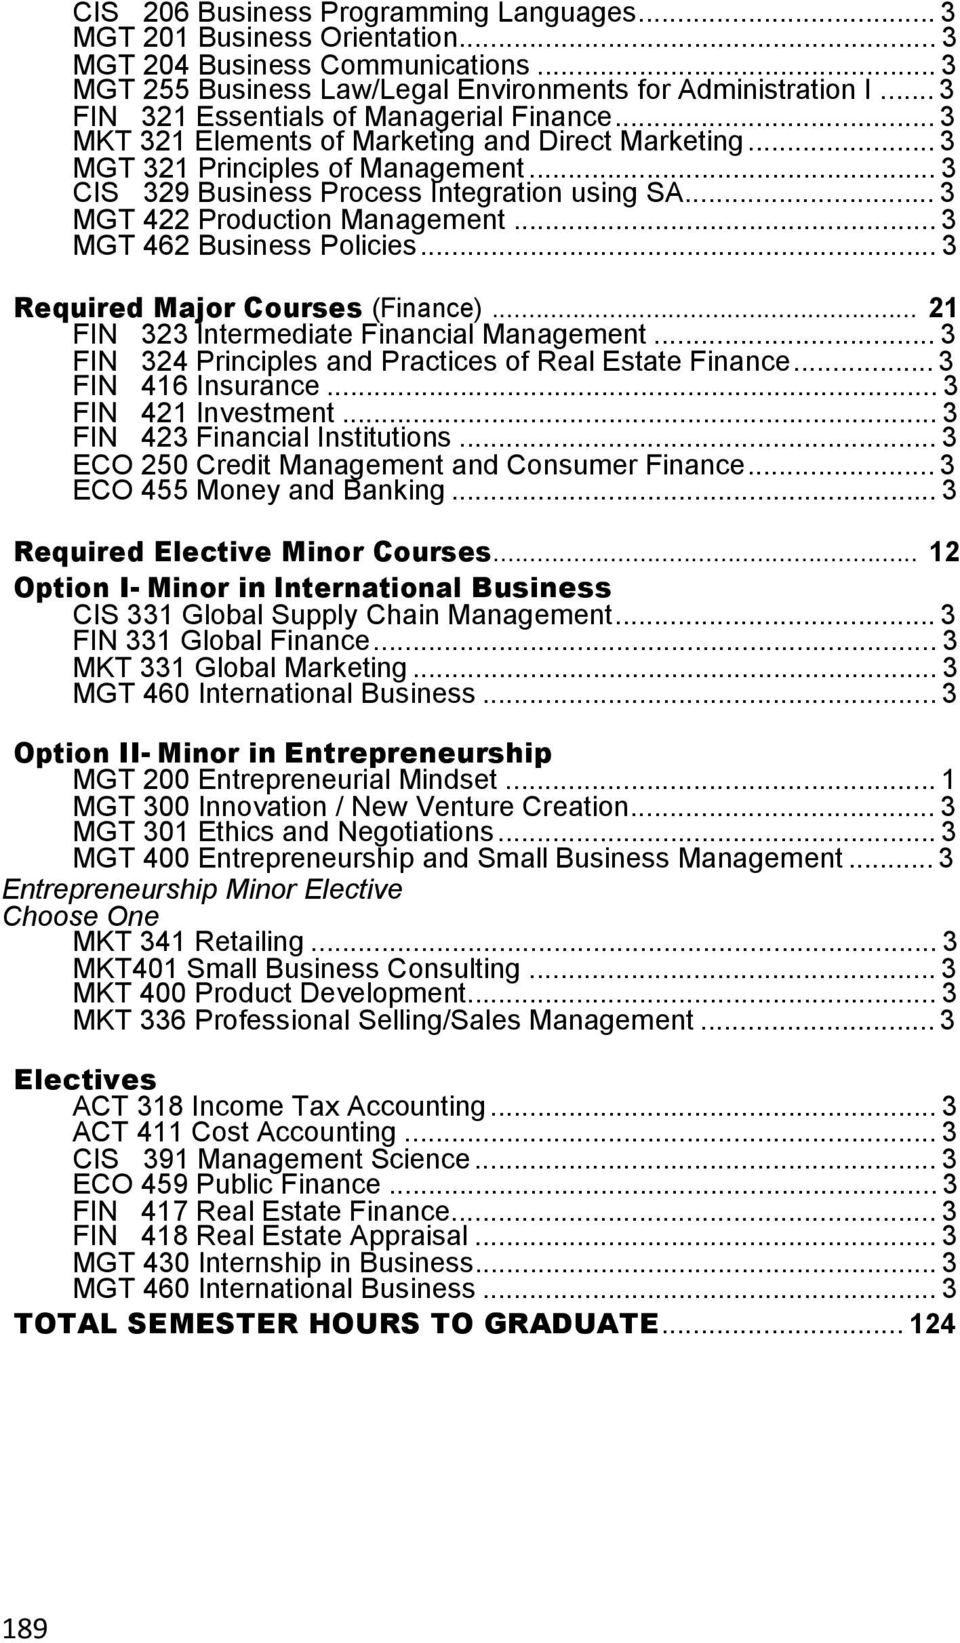 .. 3 MGT 422 Production Management... 3 MGT 462 Business Policies... 3 Required Maj Courses (Finance)... 21 FIN 323 Intermediate Financial Management.